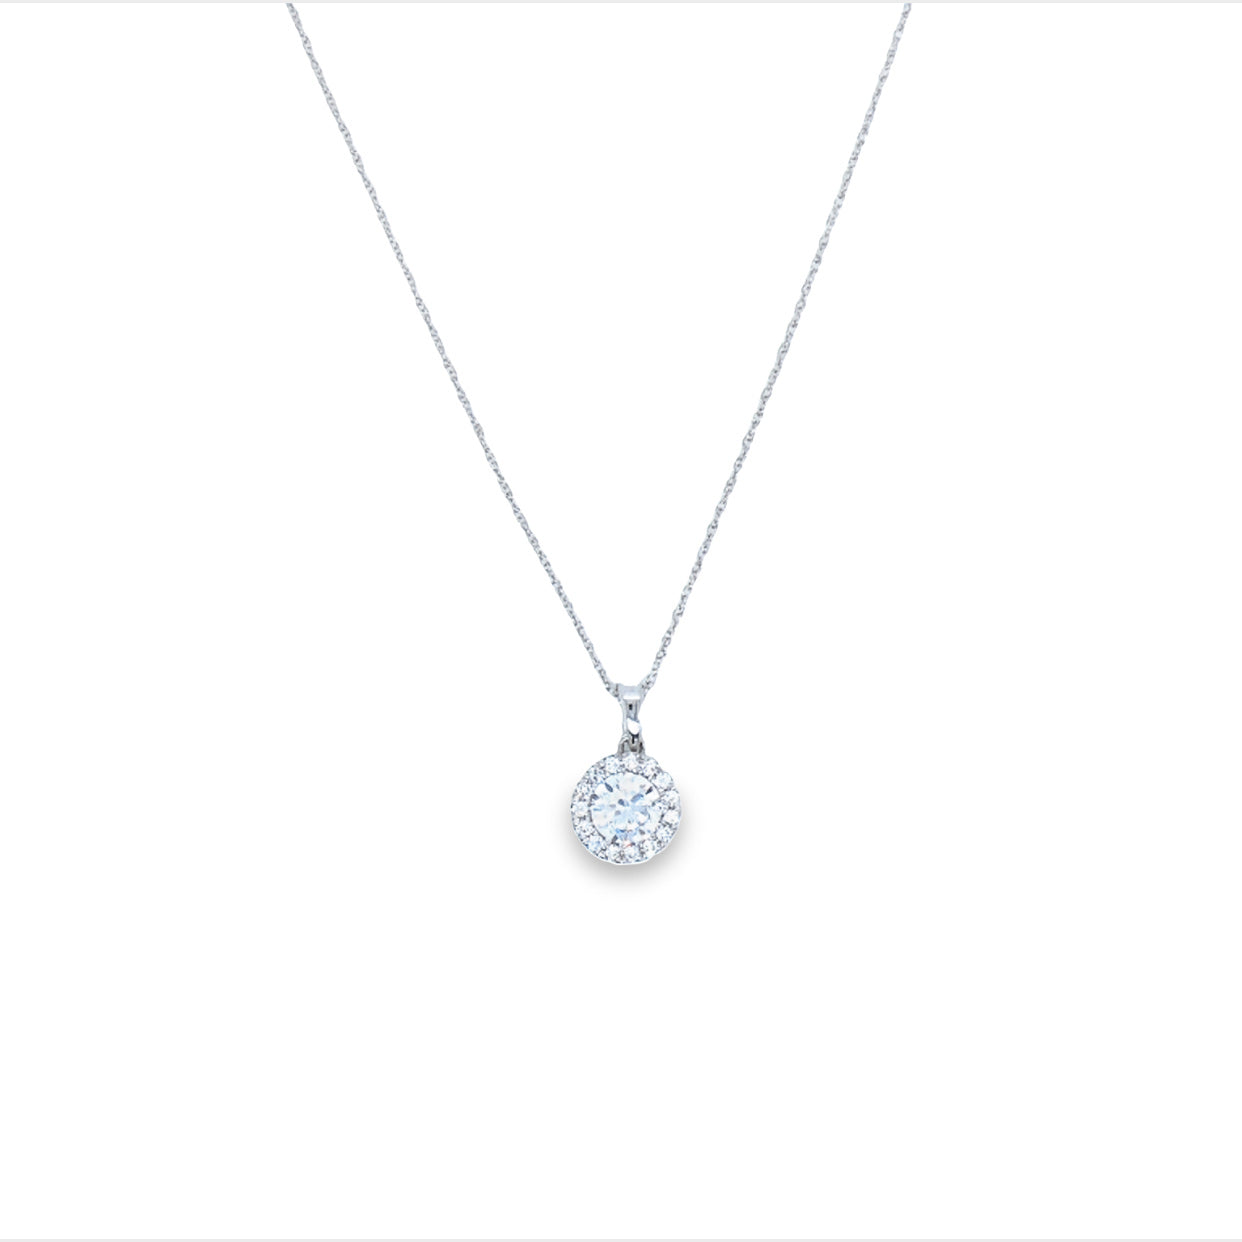 14Ct White Gold Lab Grown Round Brilliant Cut Halo Diamond Martini Pendant TDW 0.60Ct EVS Has GS Lab Cert. Has Complimentary White Gold Chain.